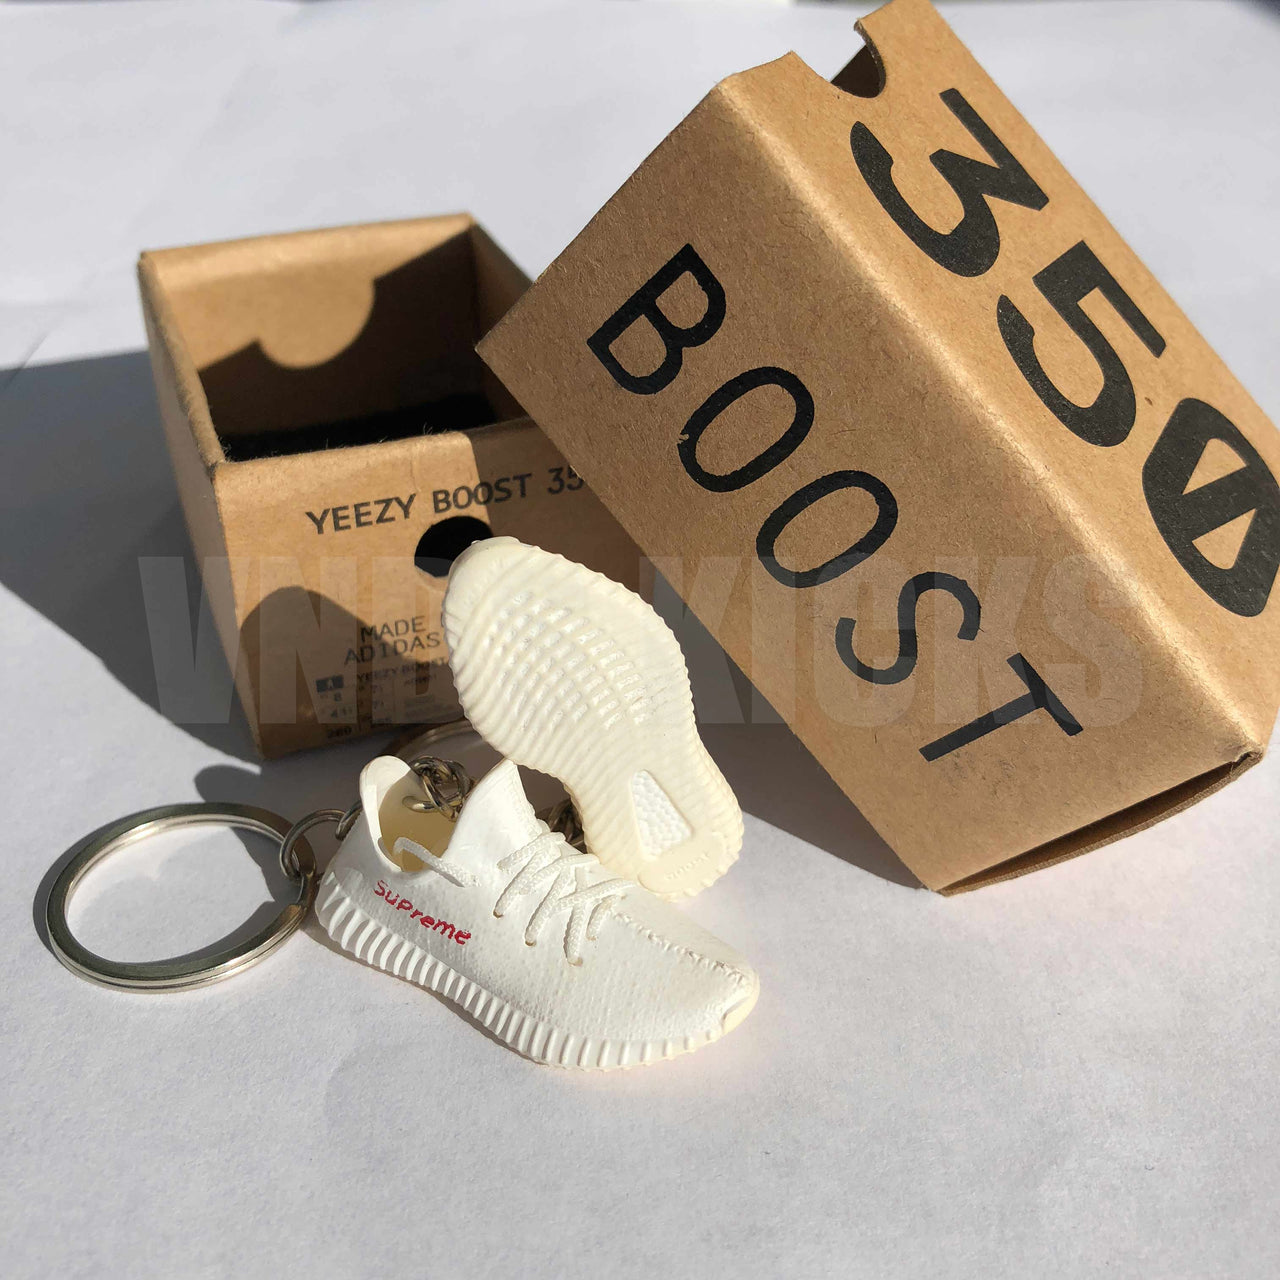 MHYPEBEAST MYSTERY BOXES  Sneakers box, Mystery box, Yeezy shoes